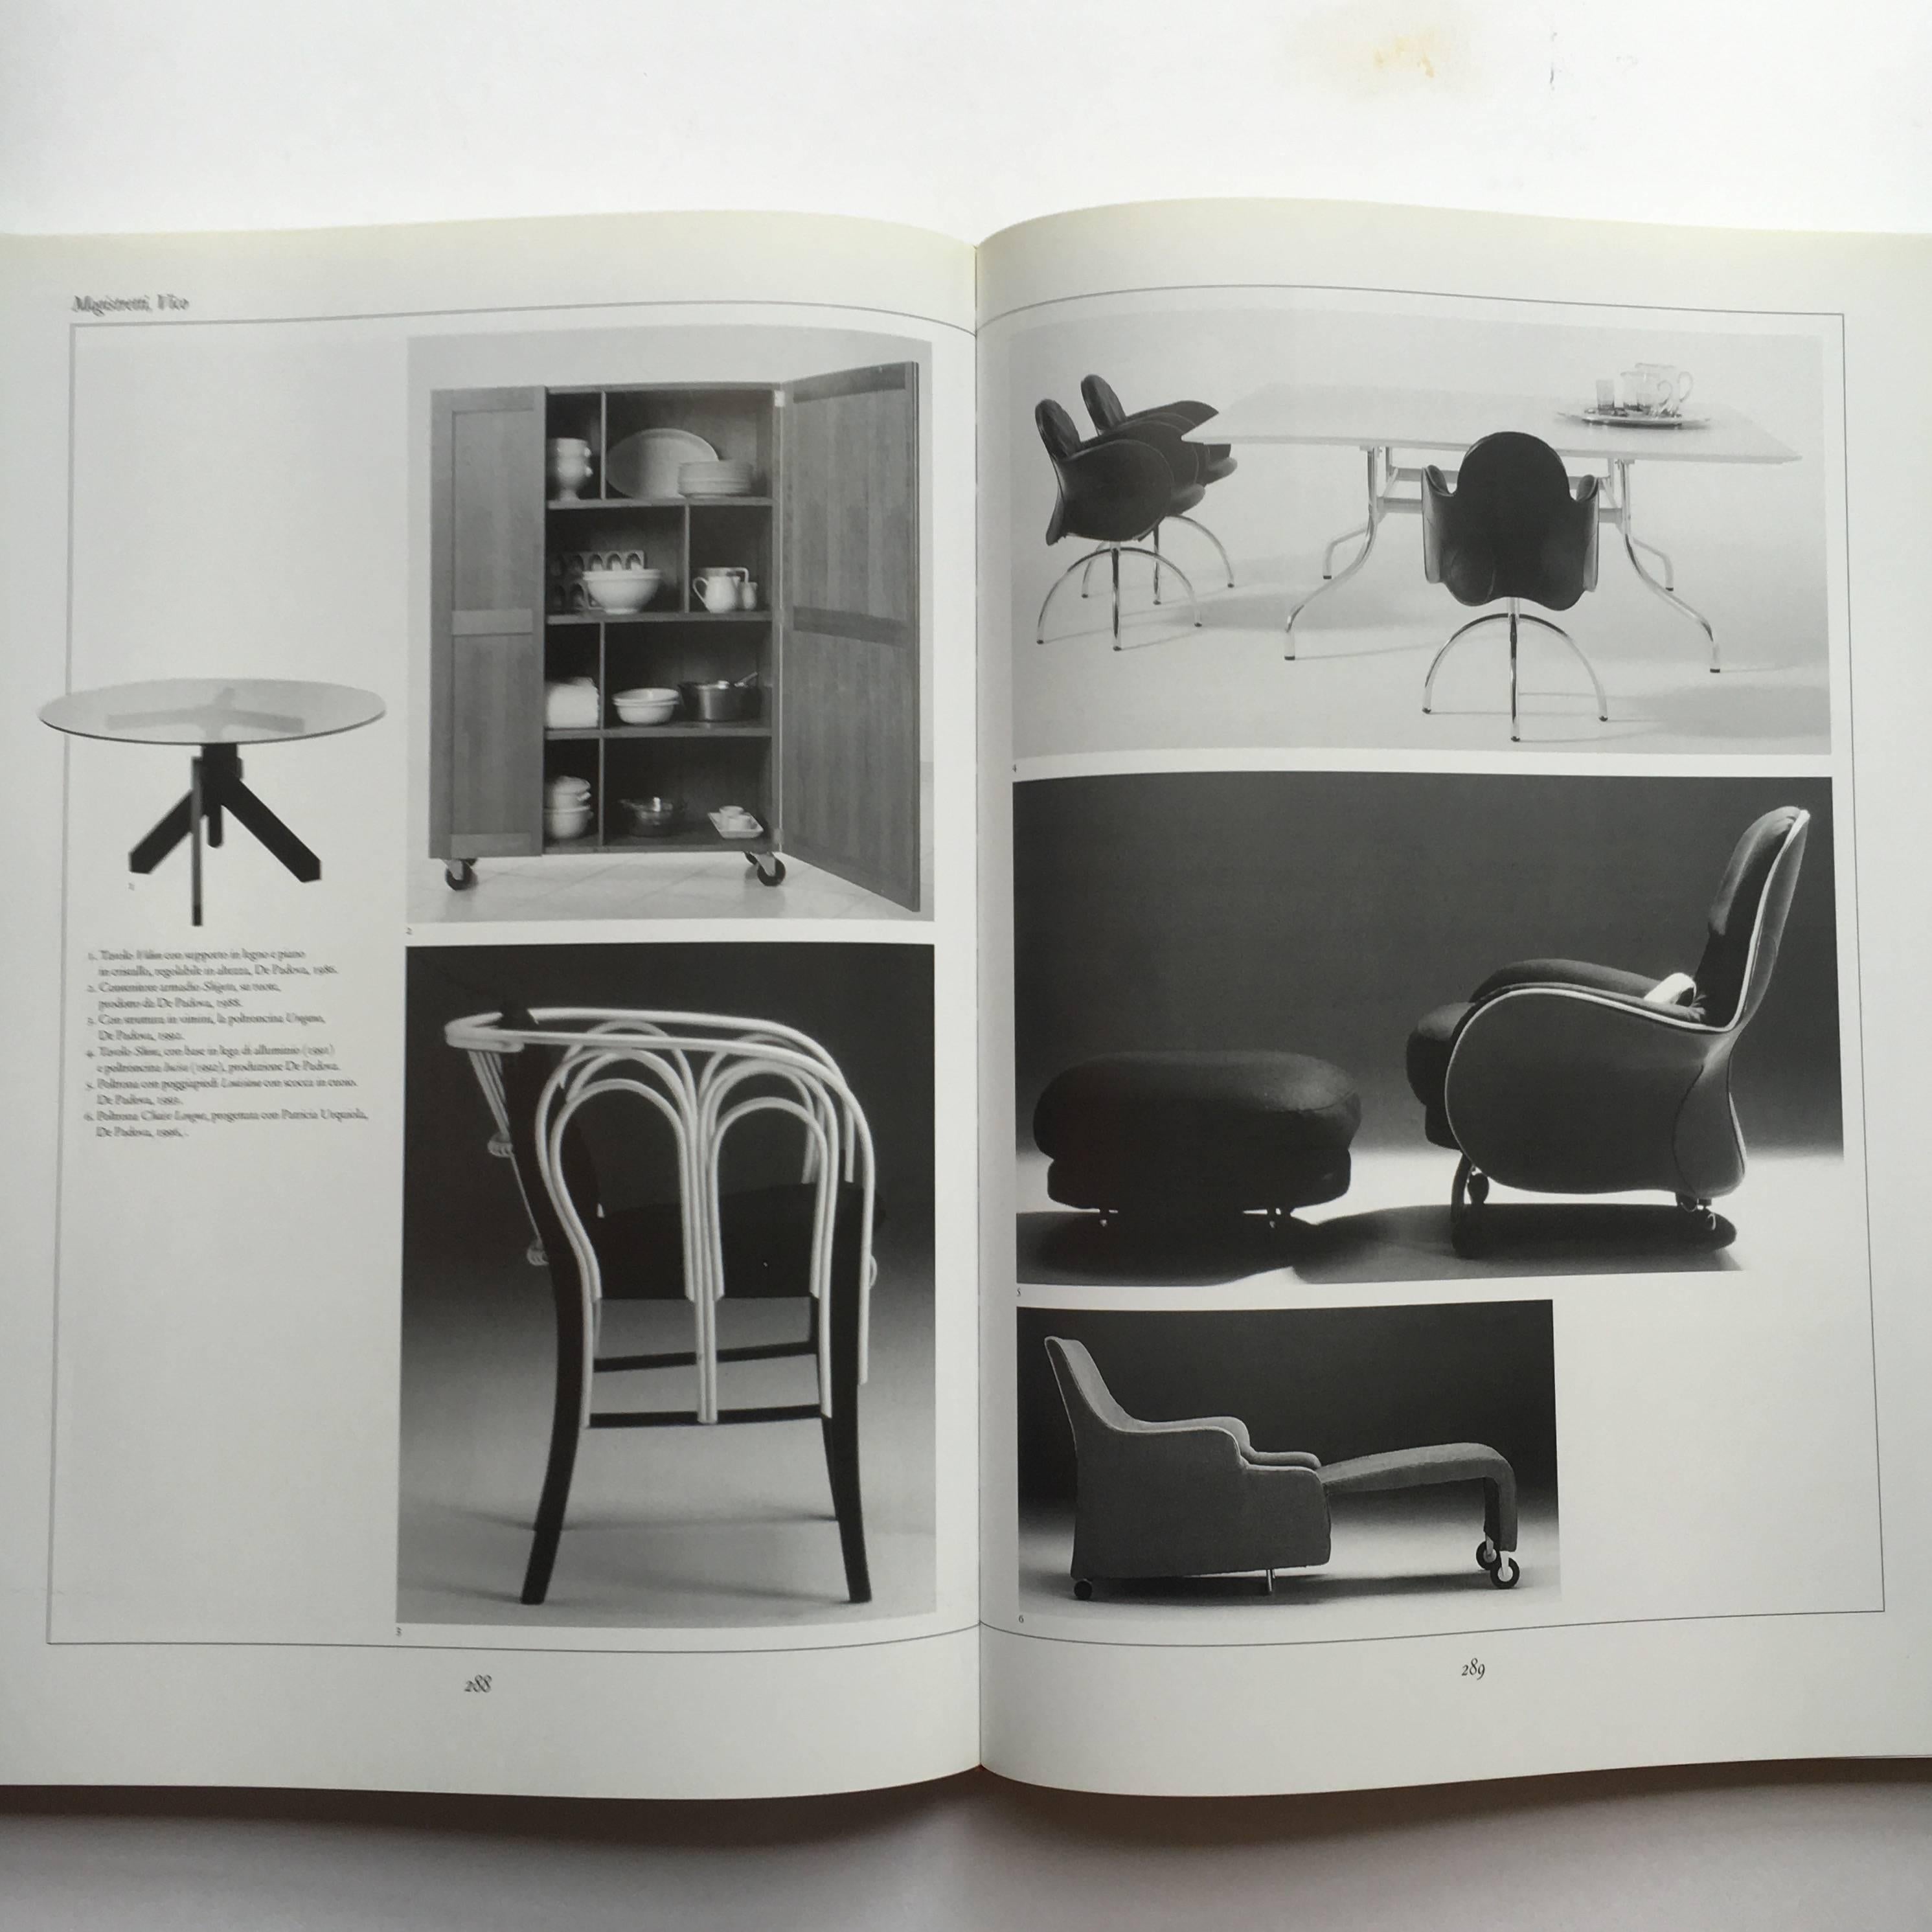 First edition, published by Umberto Allemandi & Co, 1999.

A beautiful hardback book, this is essentially a catalogue of the top Italian designers and design companies established in the second half of the twentieth century. Featuring a